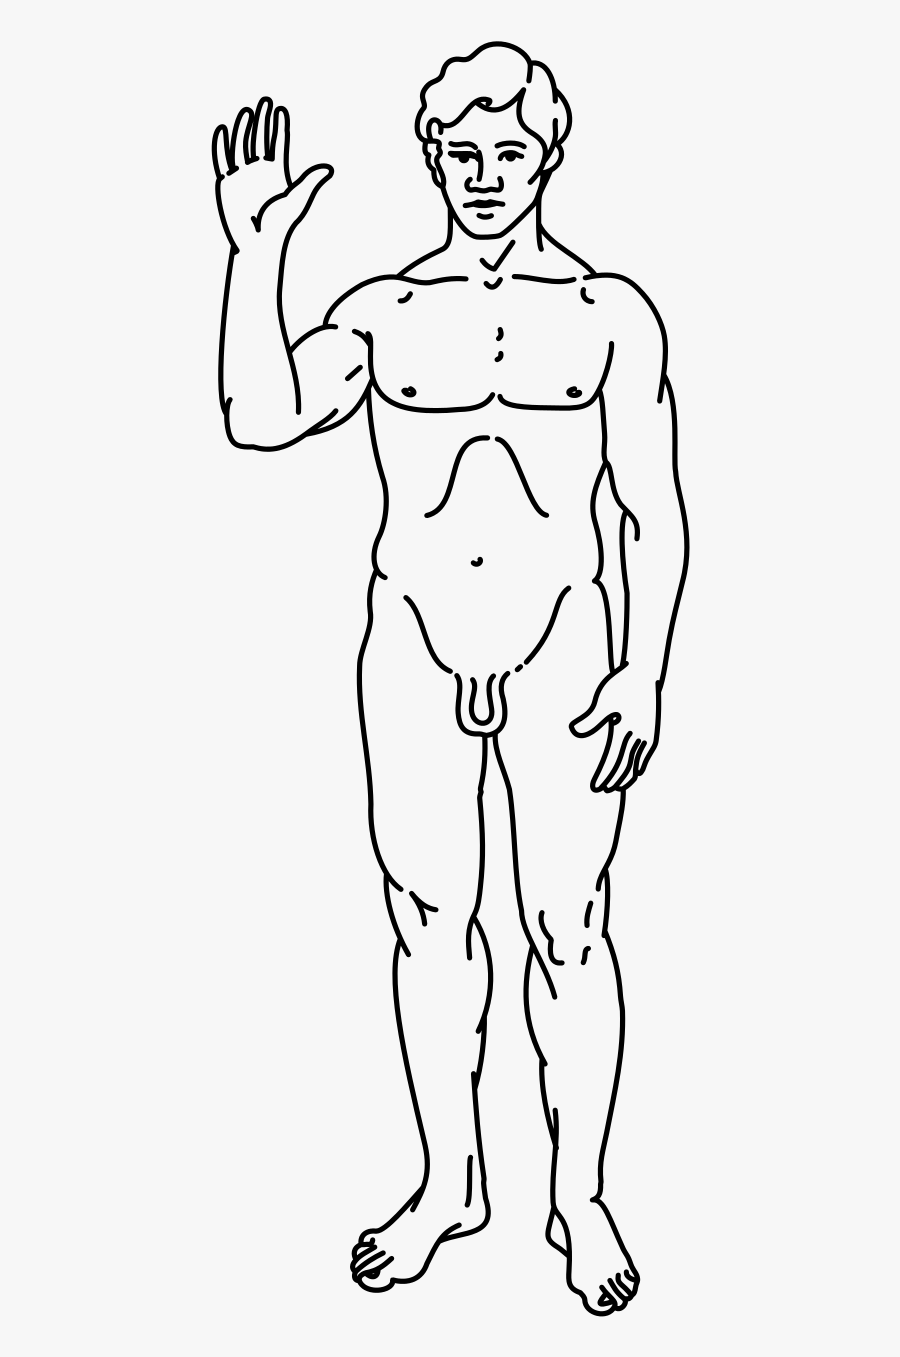 Filepioneer Plaque Line Drawing Of A Human Male - Draw A Homo Sapiens, Transparent Clipart